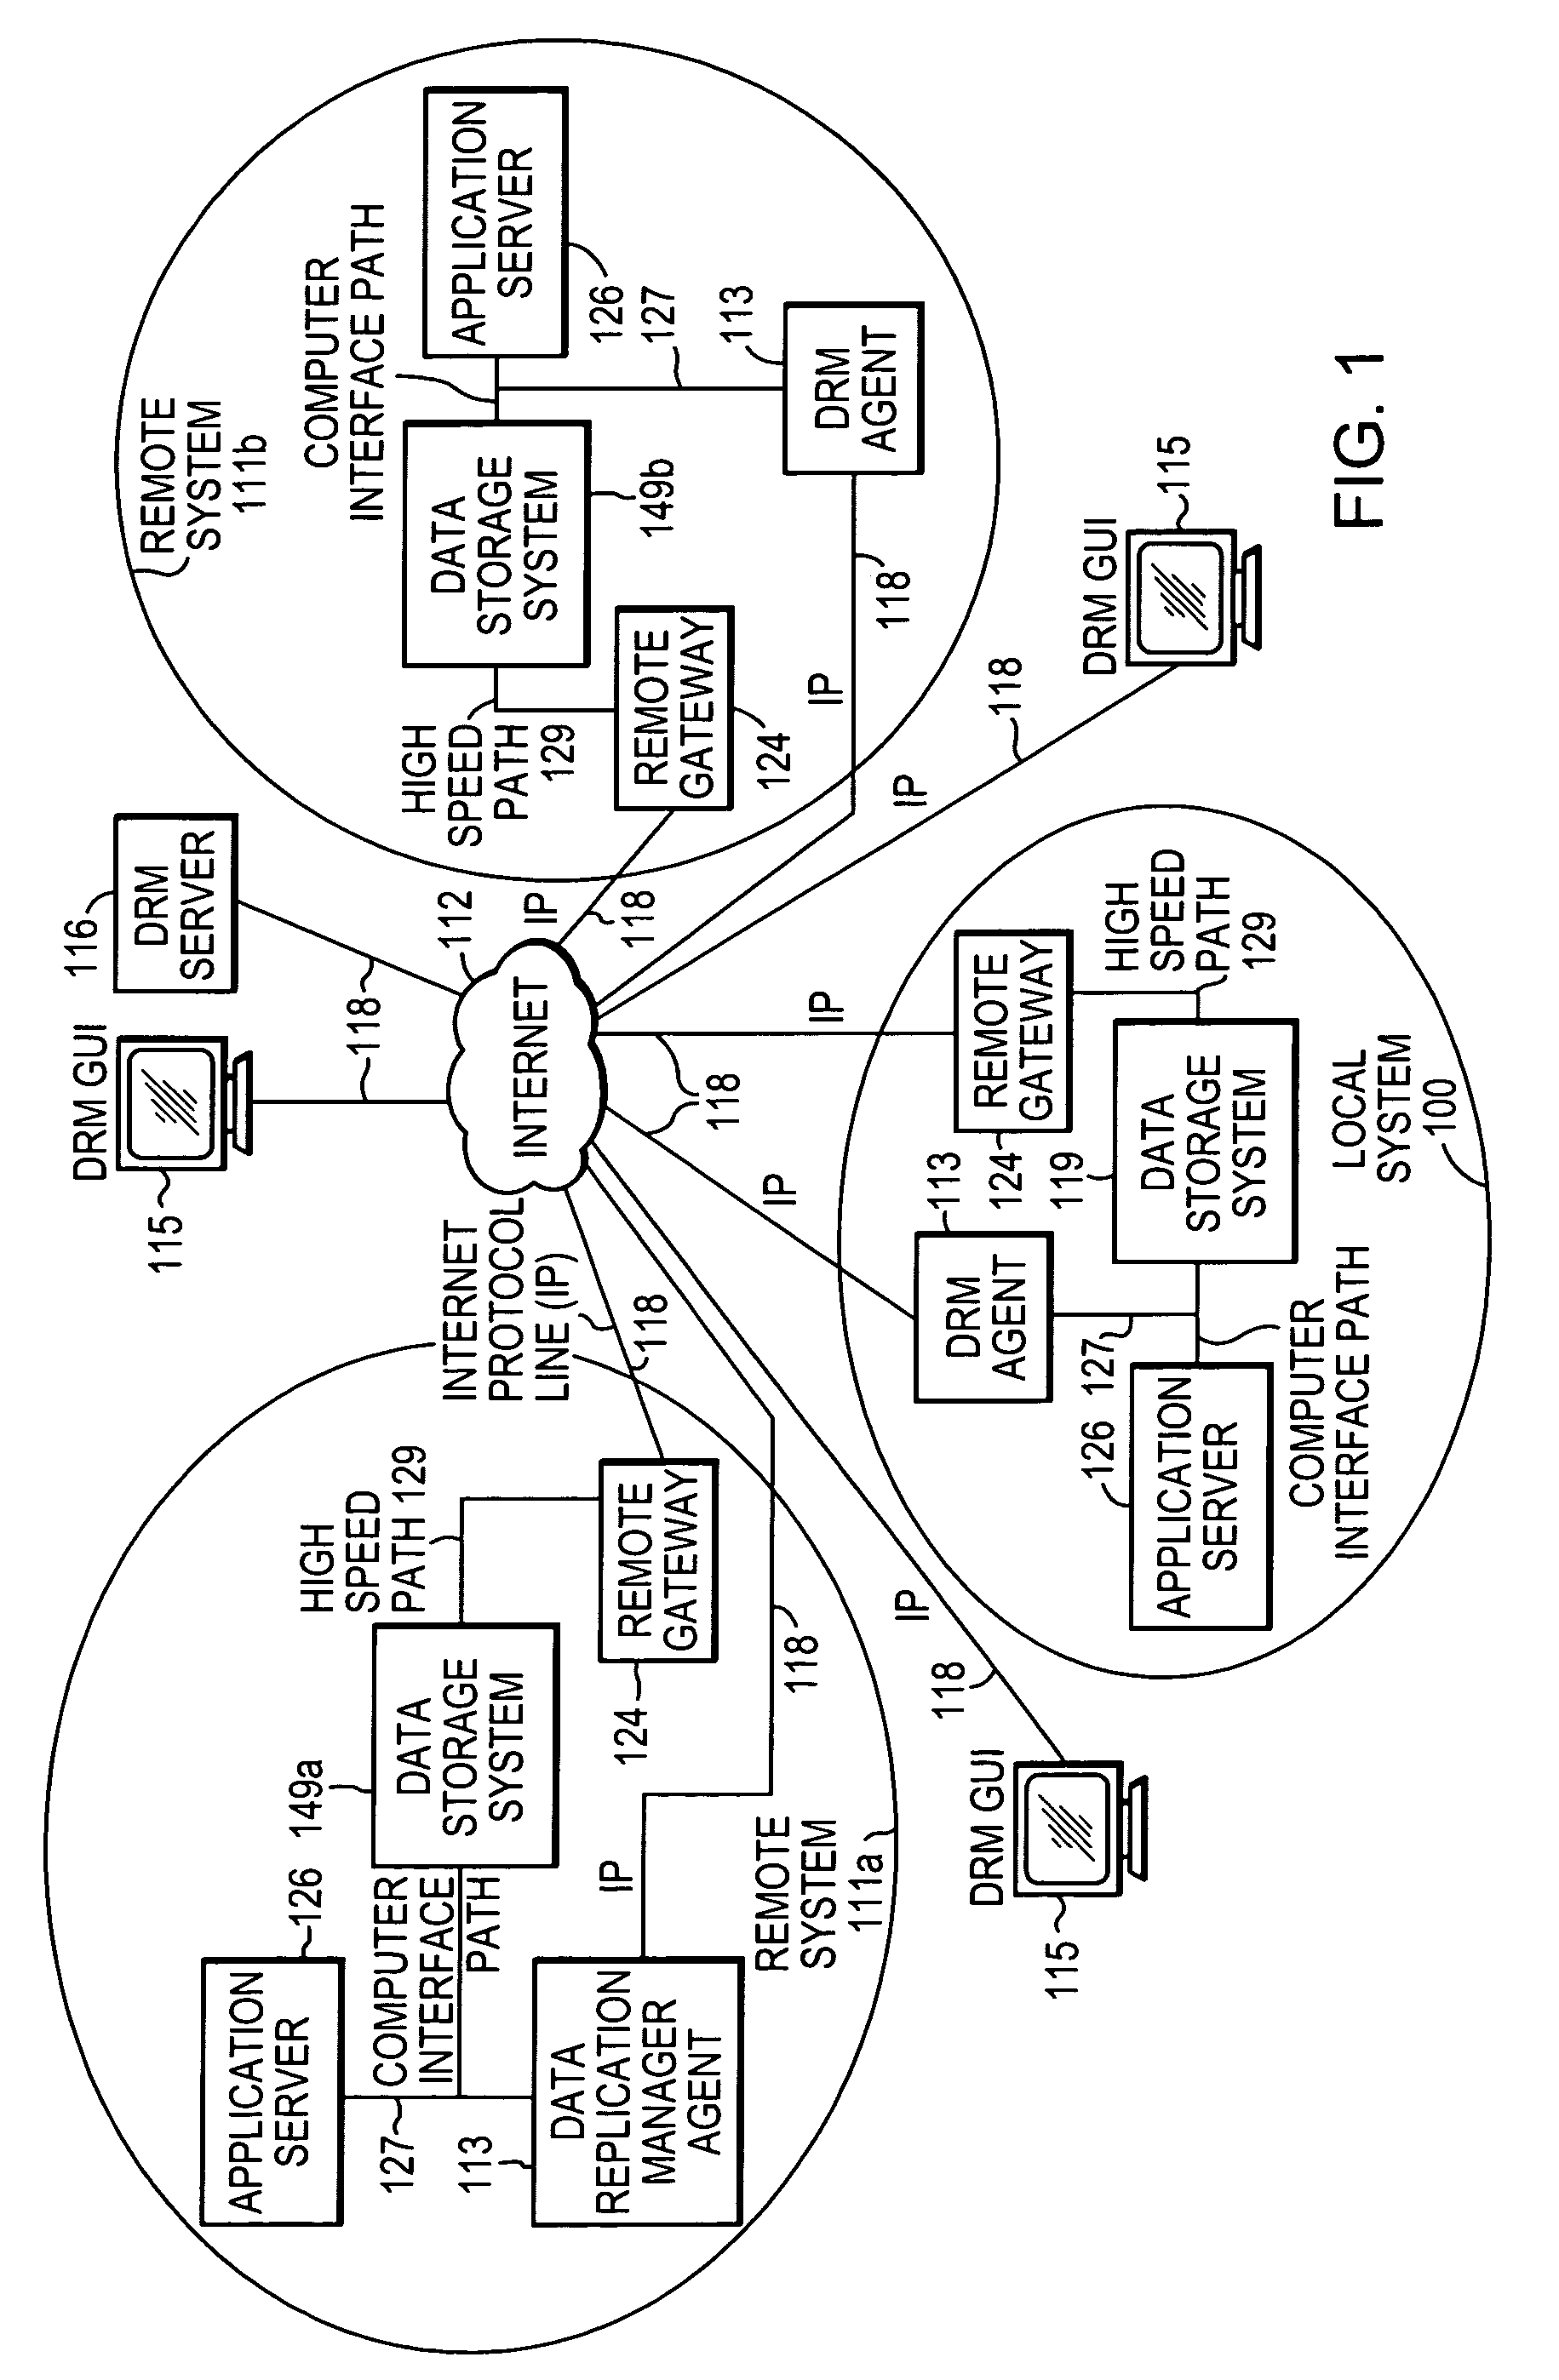 System and method for replication of one or more databases